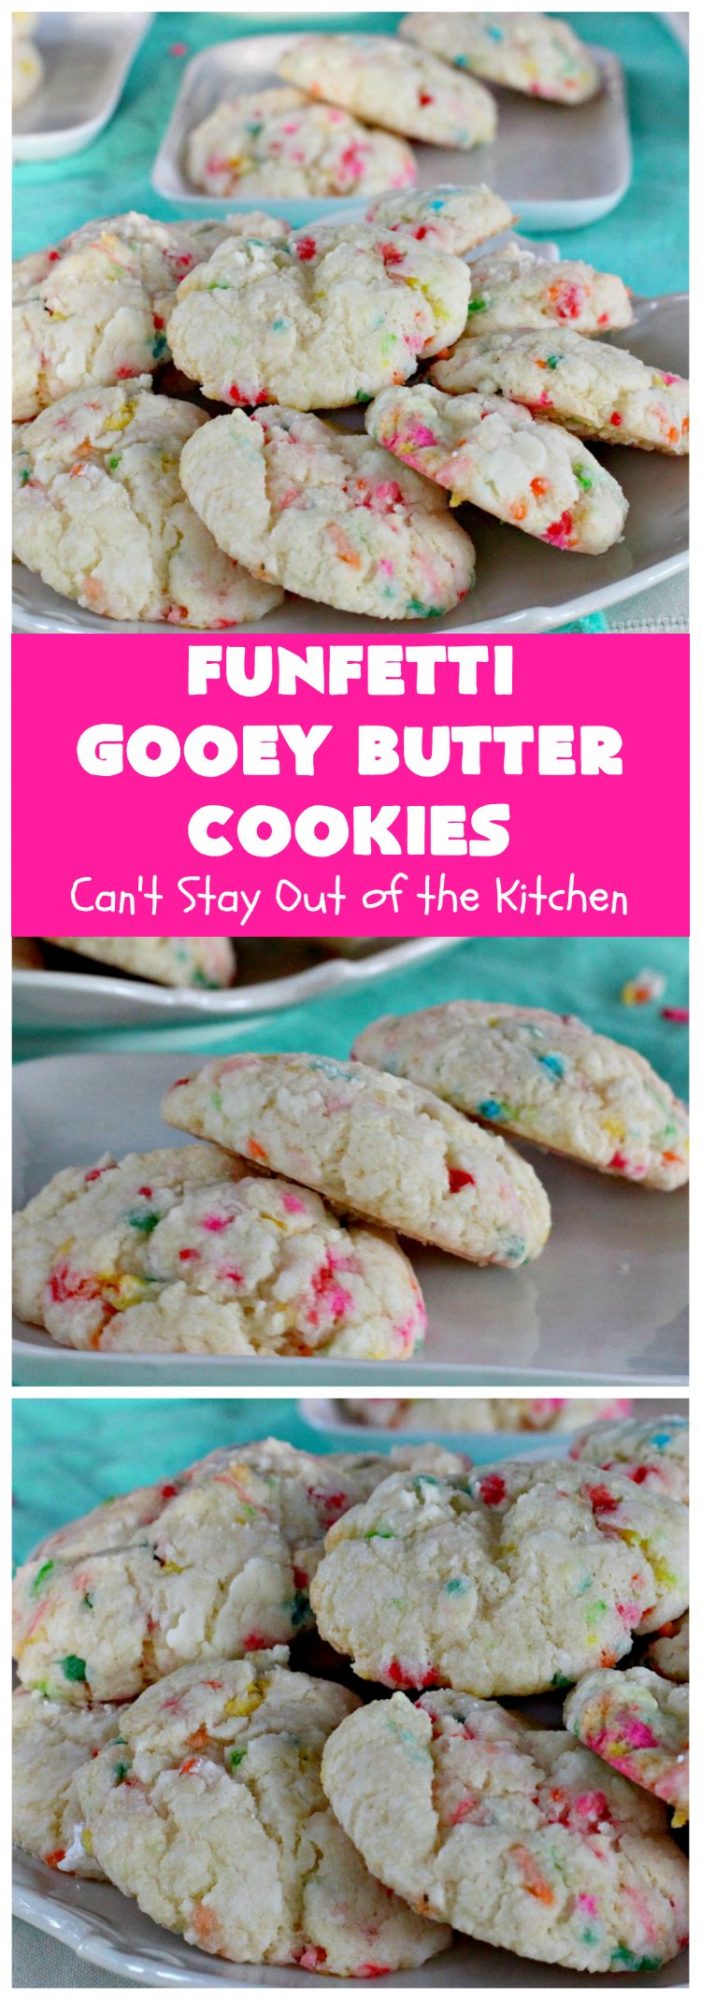 Funfetti Gooey Butter Cookies – Can't Stay Out of the Kitchen